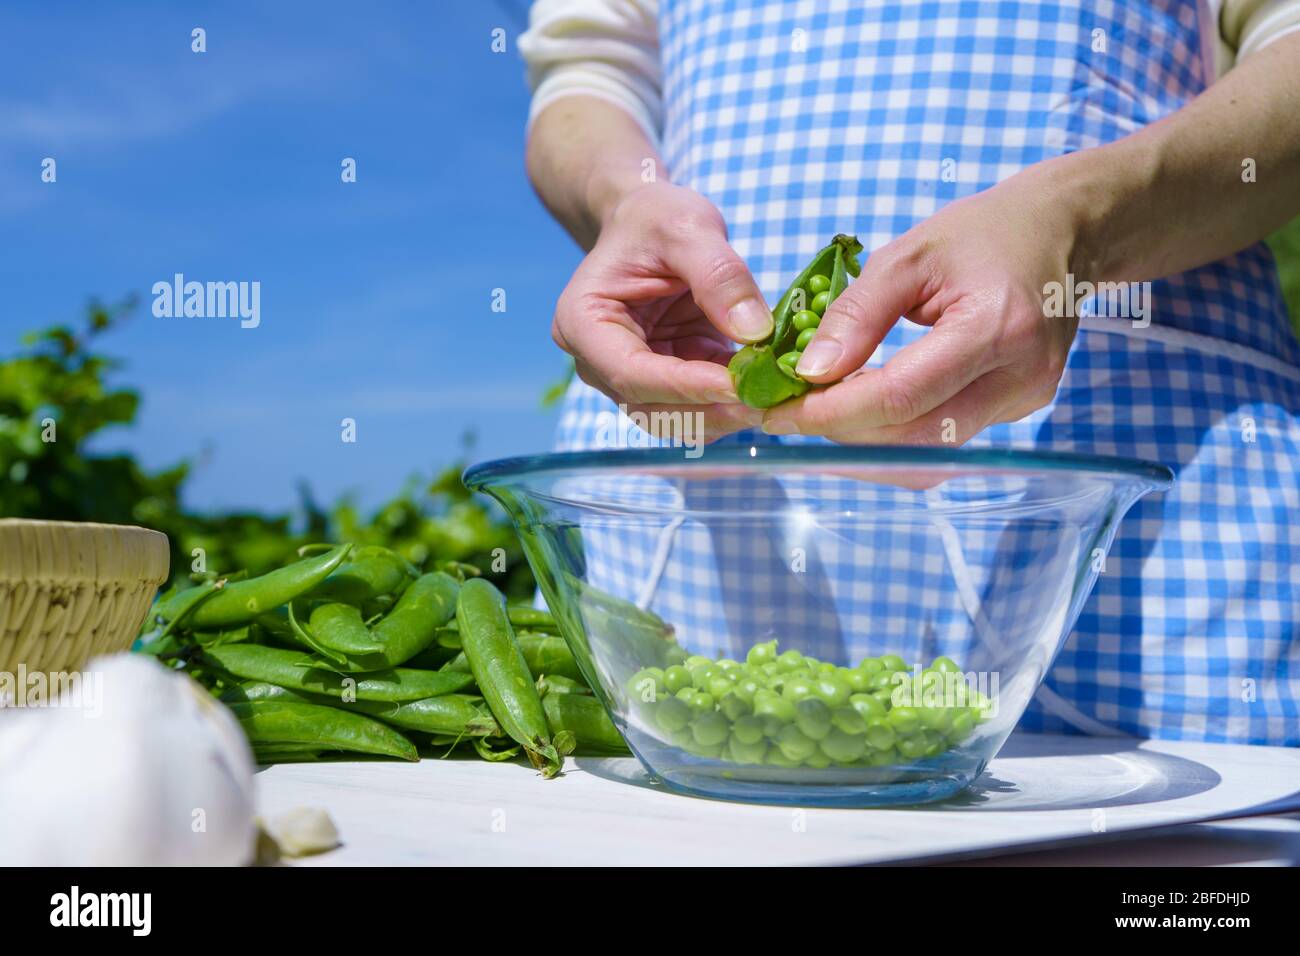 Woman with apron shells peas inside a glass bowl outdoors with strong sunlight in the greenery and blue skies Stock Photo